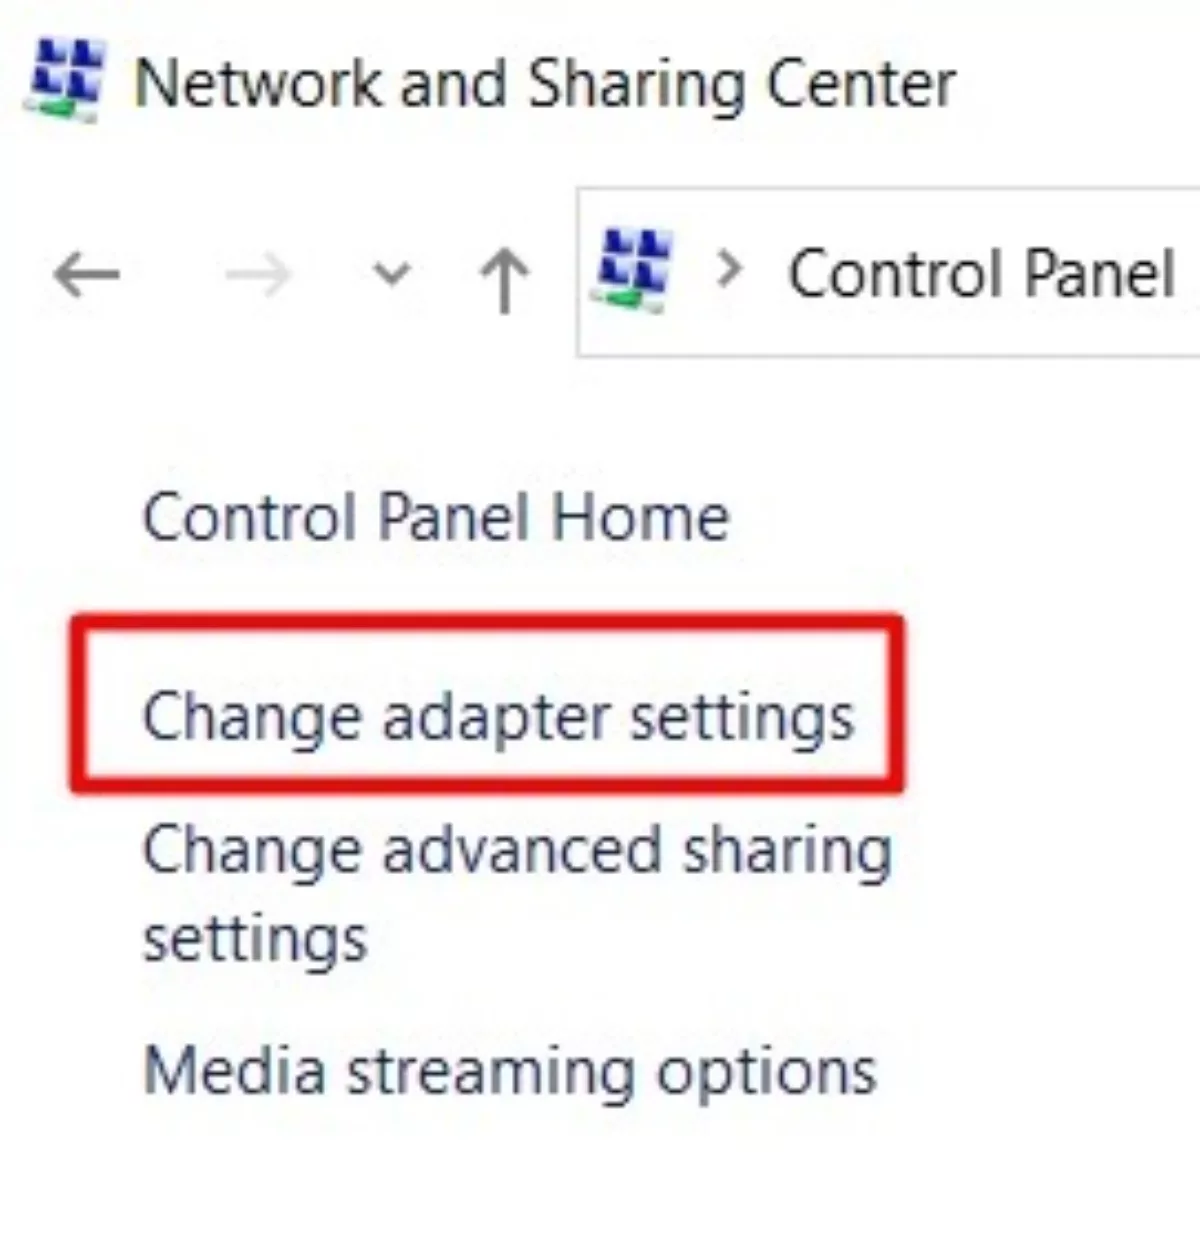 Change adapter settings to get a DNS update, error should be gone after that.